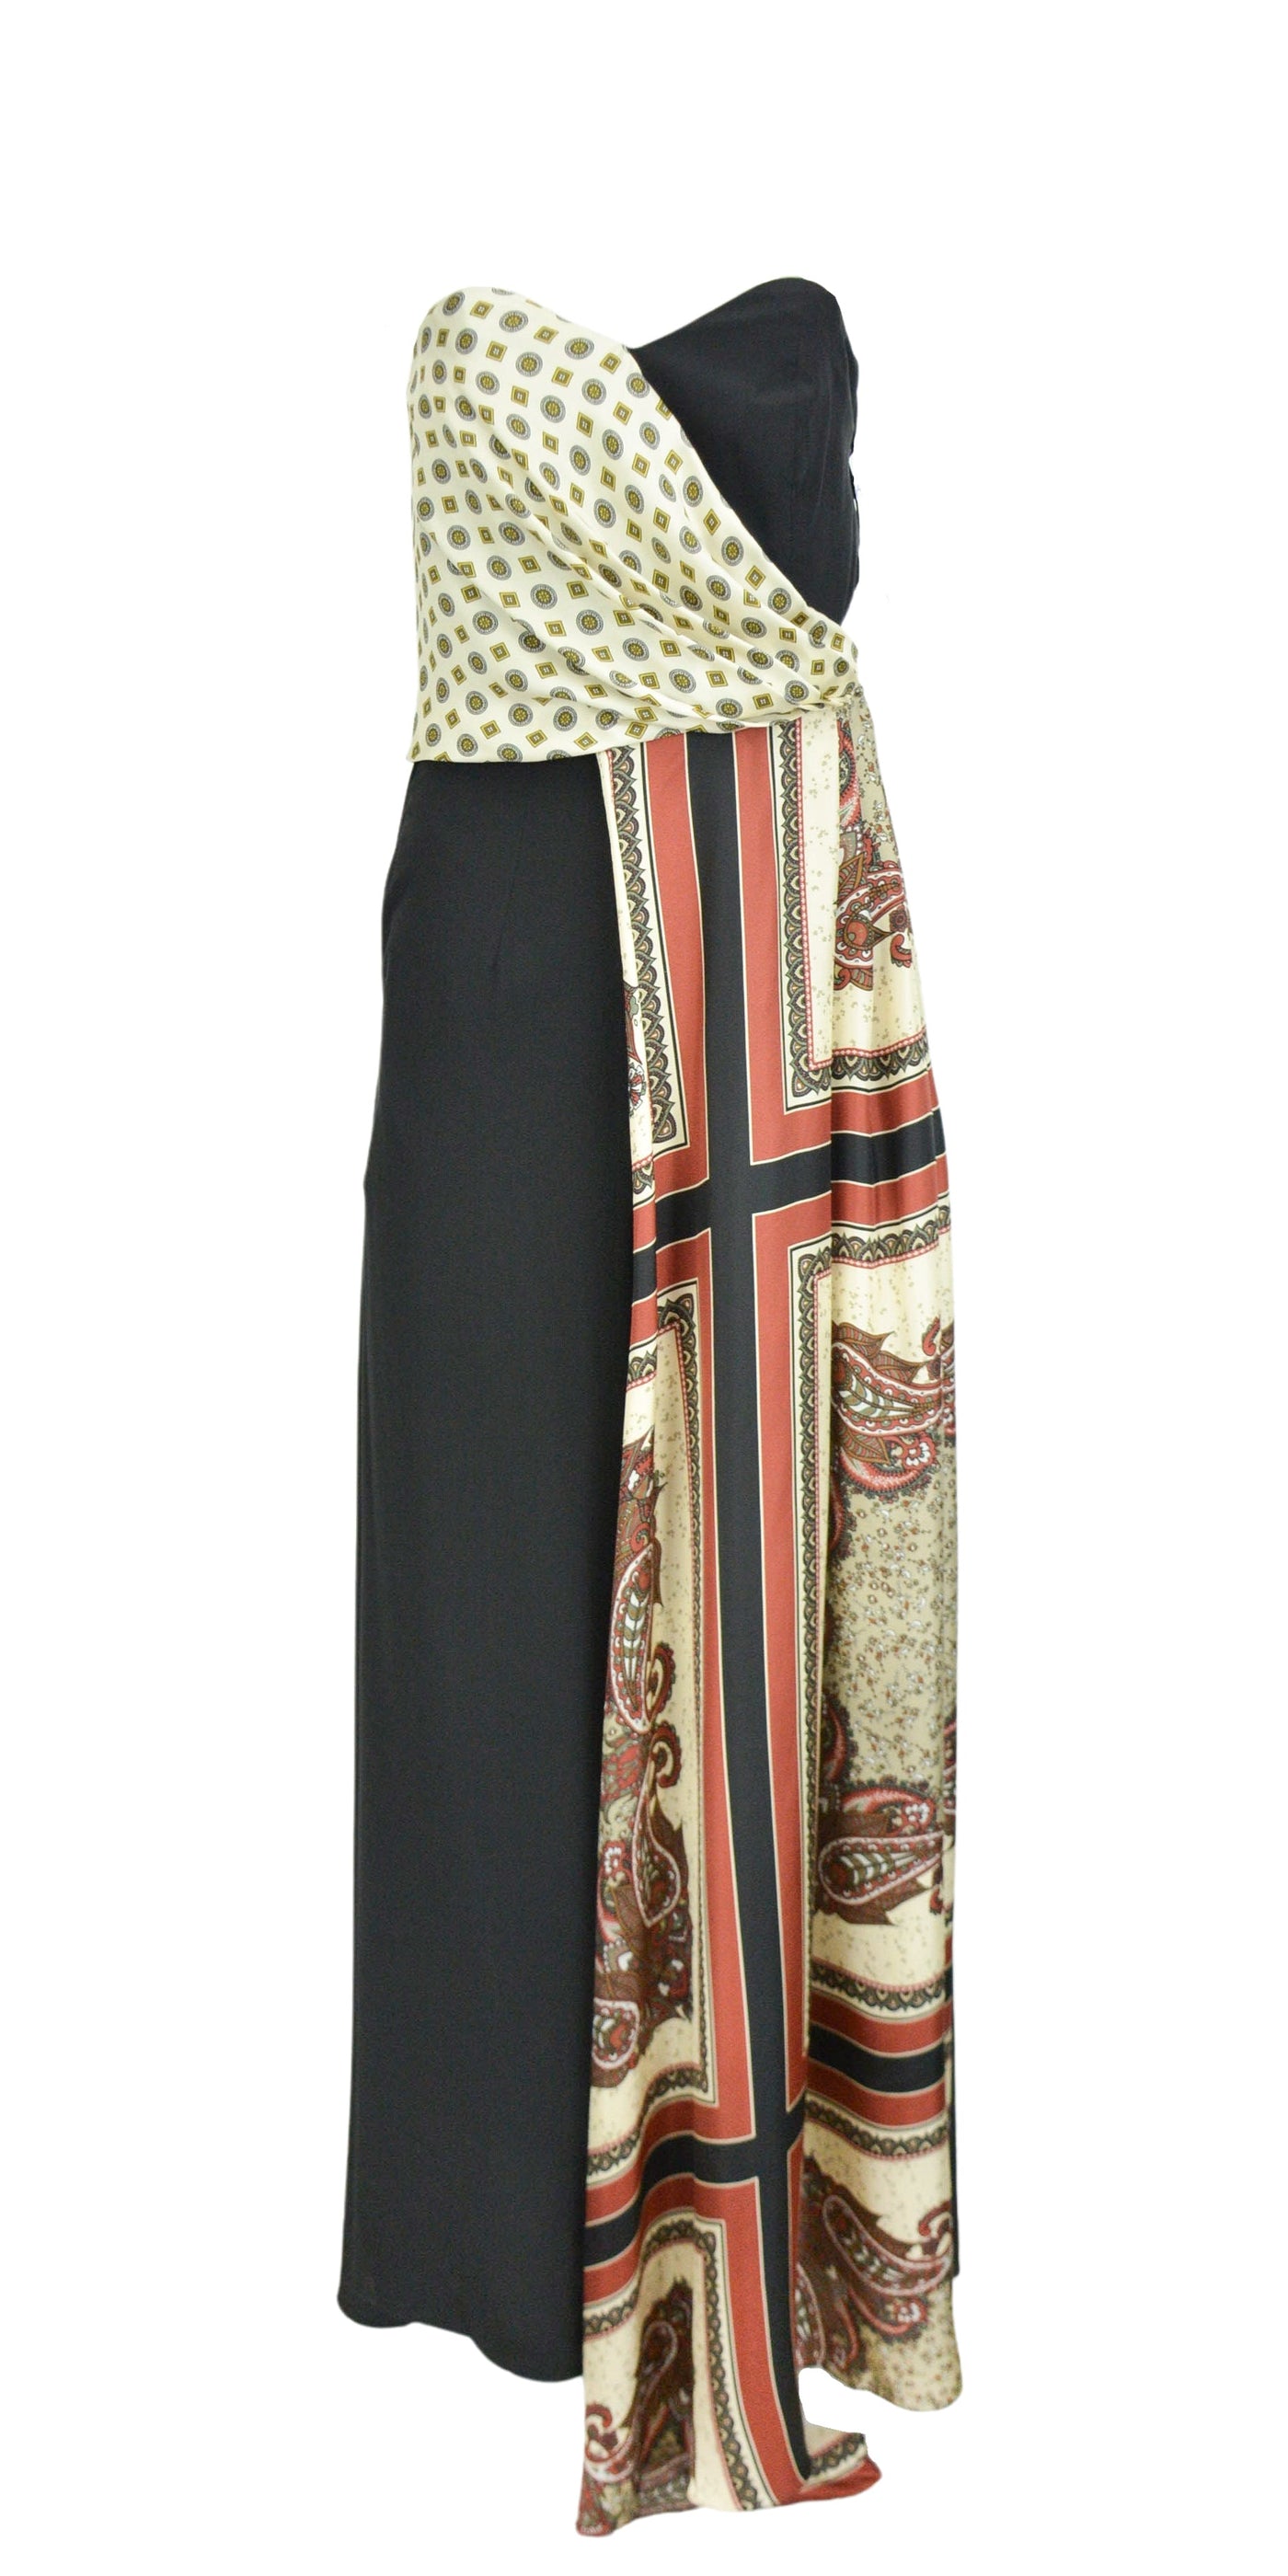 Rosie Assoulin Jumper Gown in Vintage Scarf Print - Discounts on Rosie Assoulin at UAL